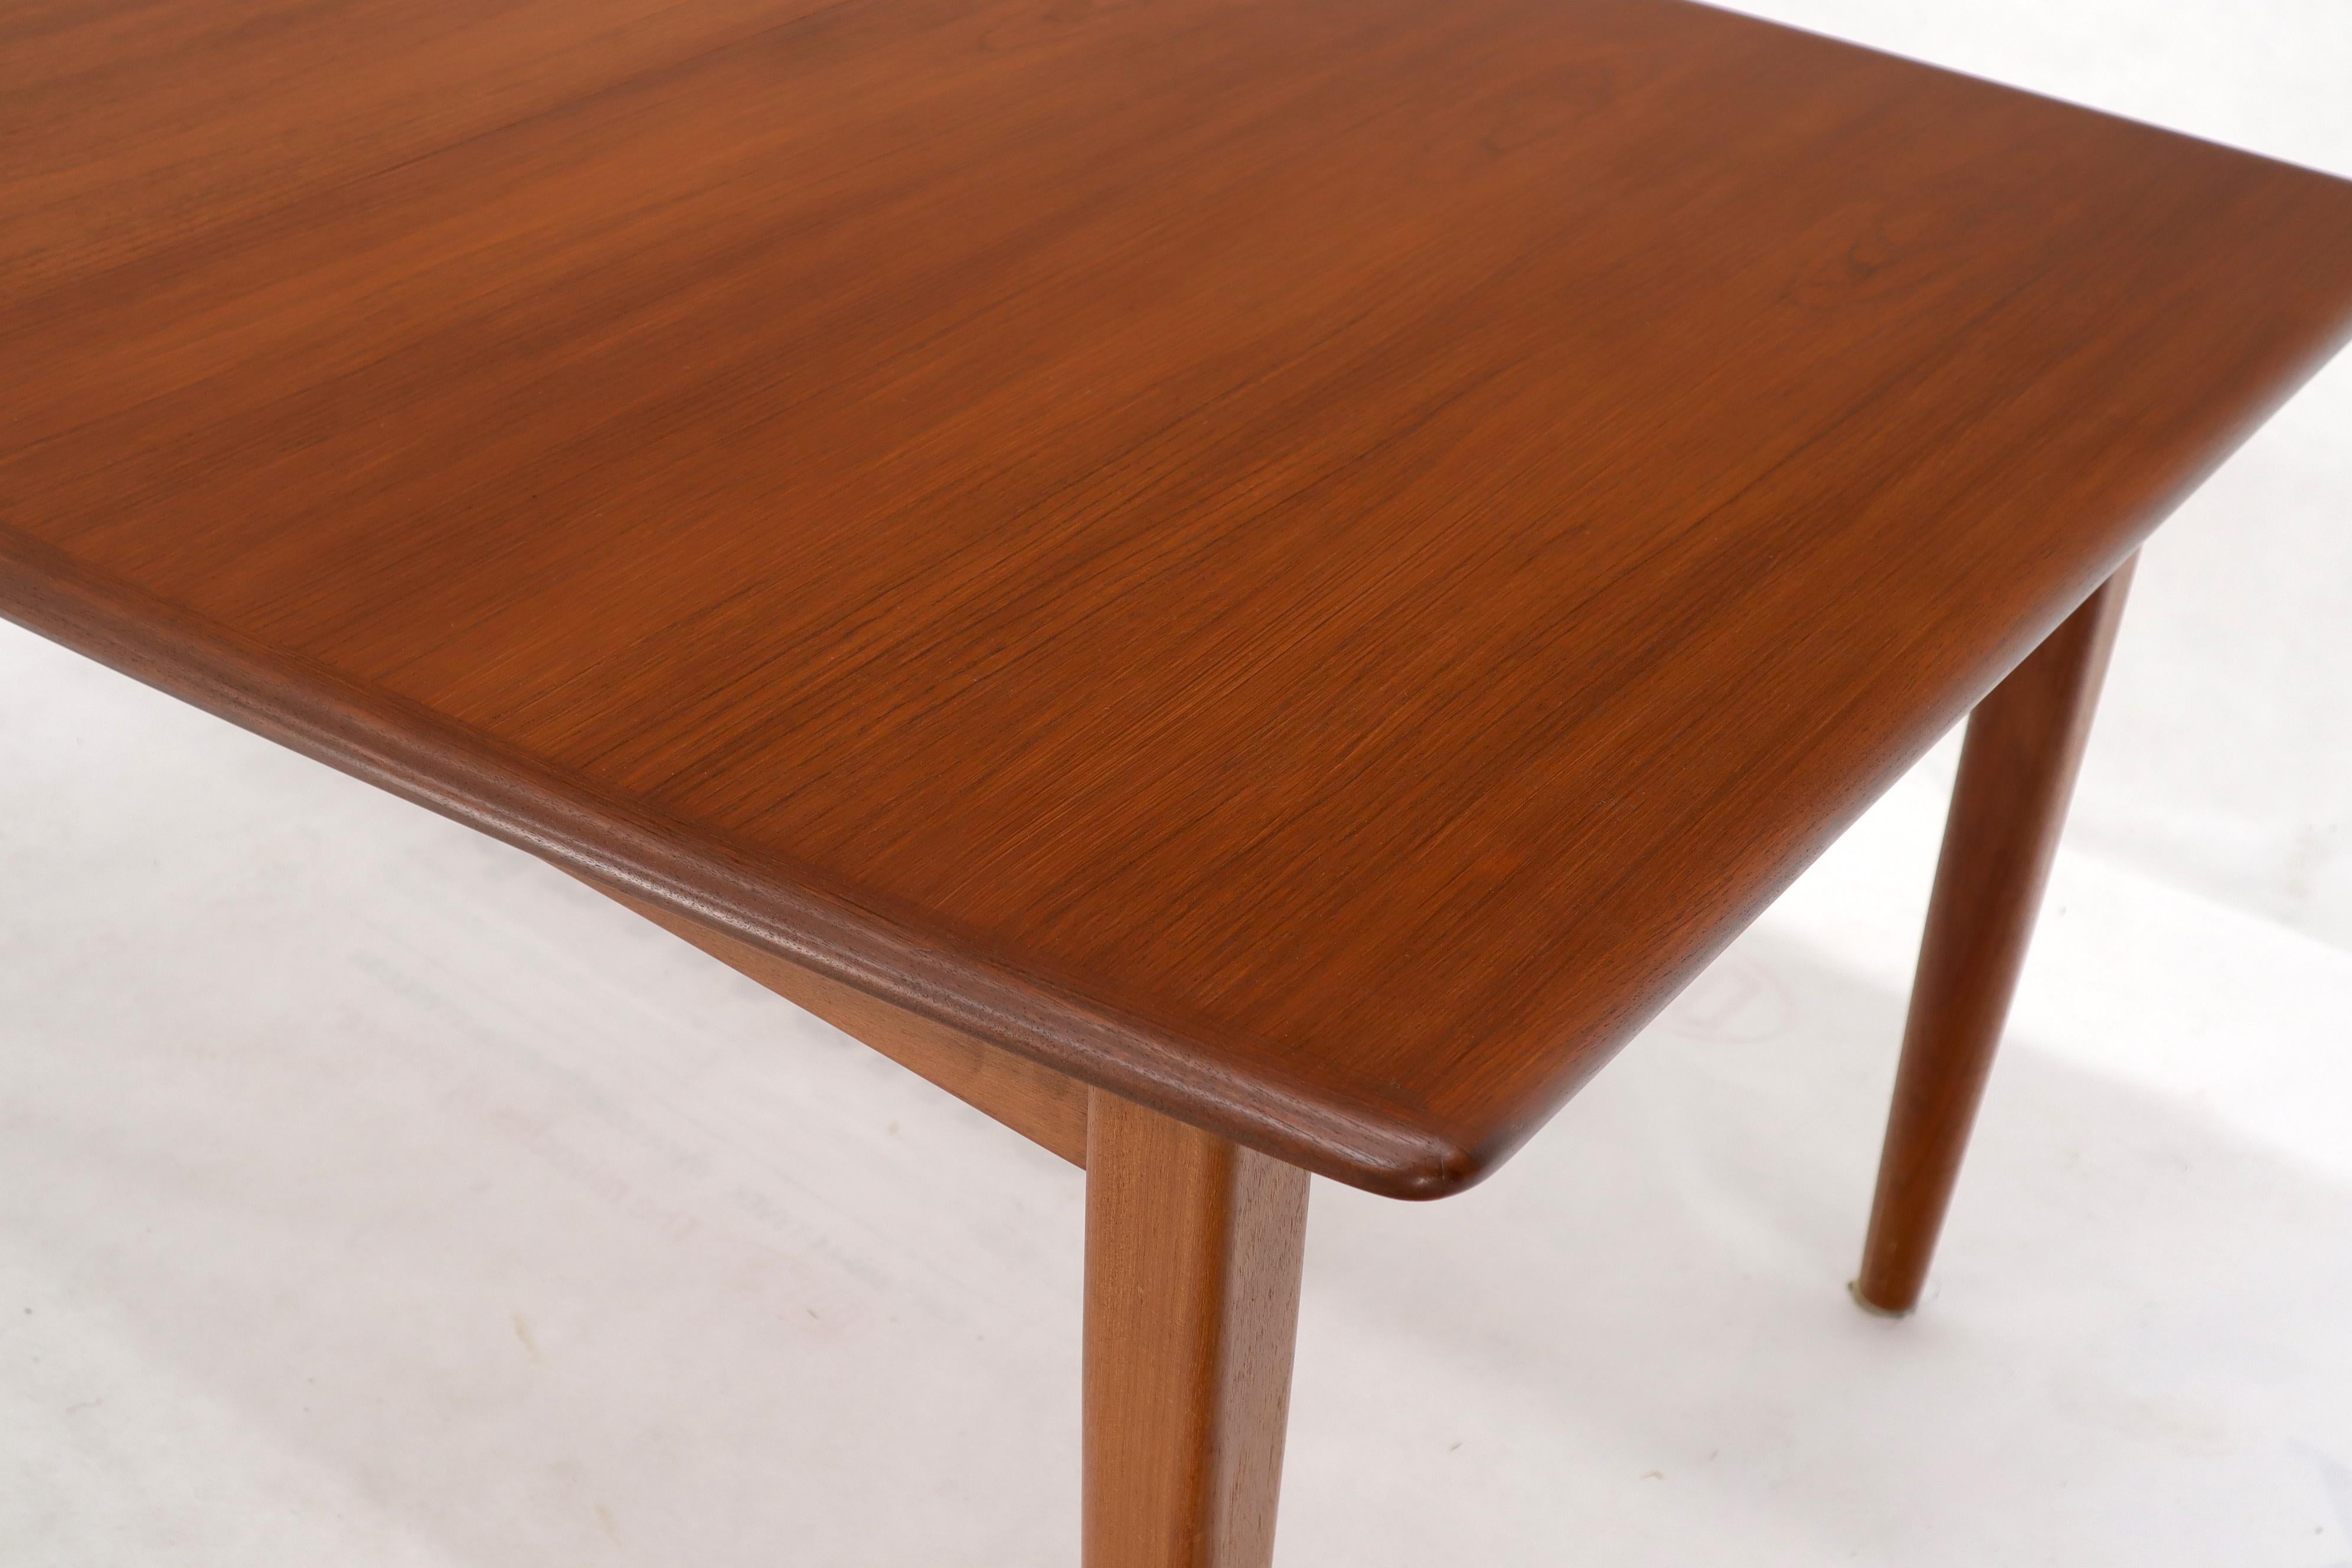 Danish Mid-Century Modern Teak Dining Table with Two Pop Up Self Storing Leaves For Sale 6